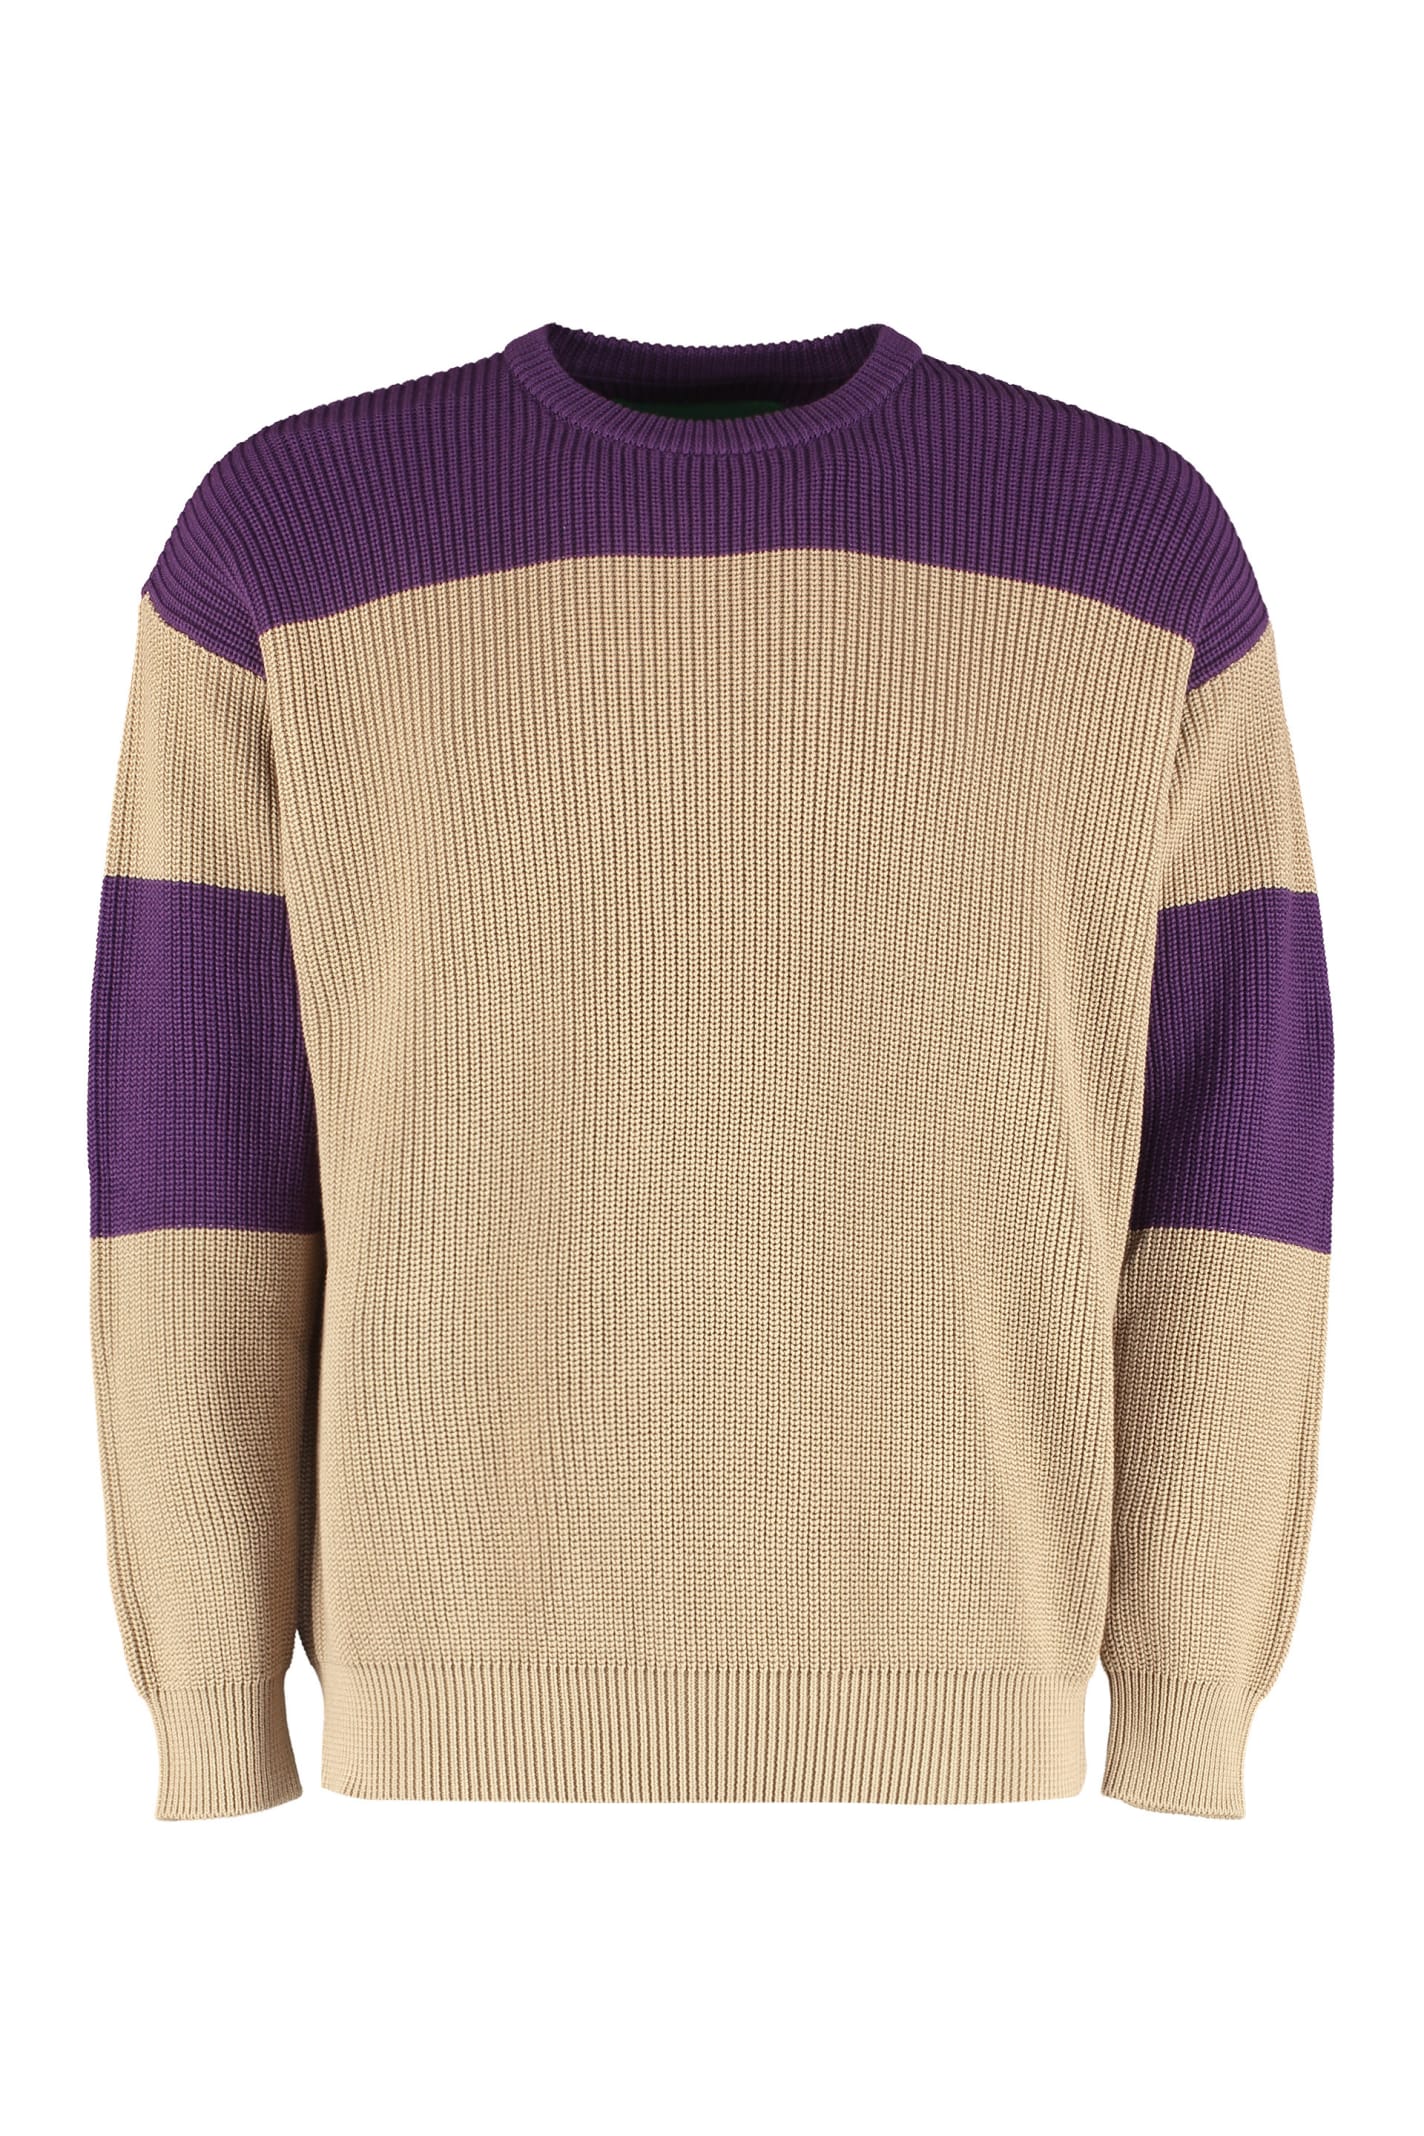 EMPORIO ARMANI SUSTAINABILITY PROJECT - RIBBED SWEATER